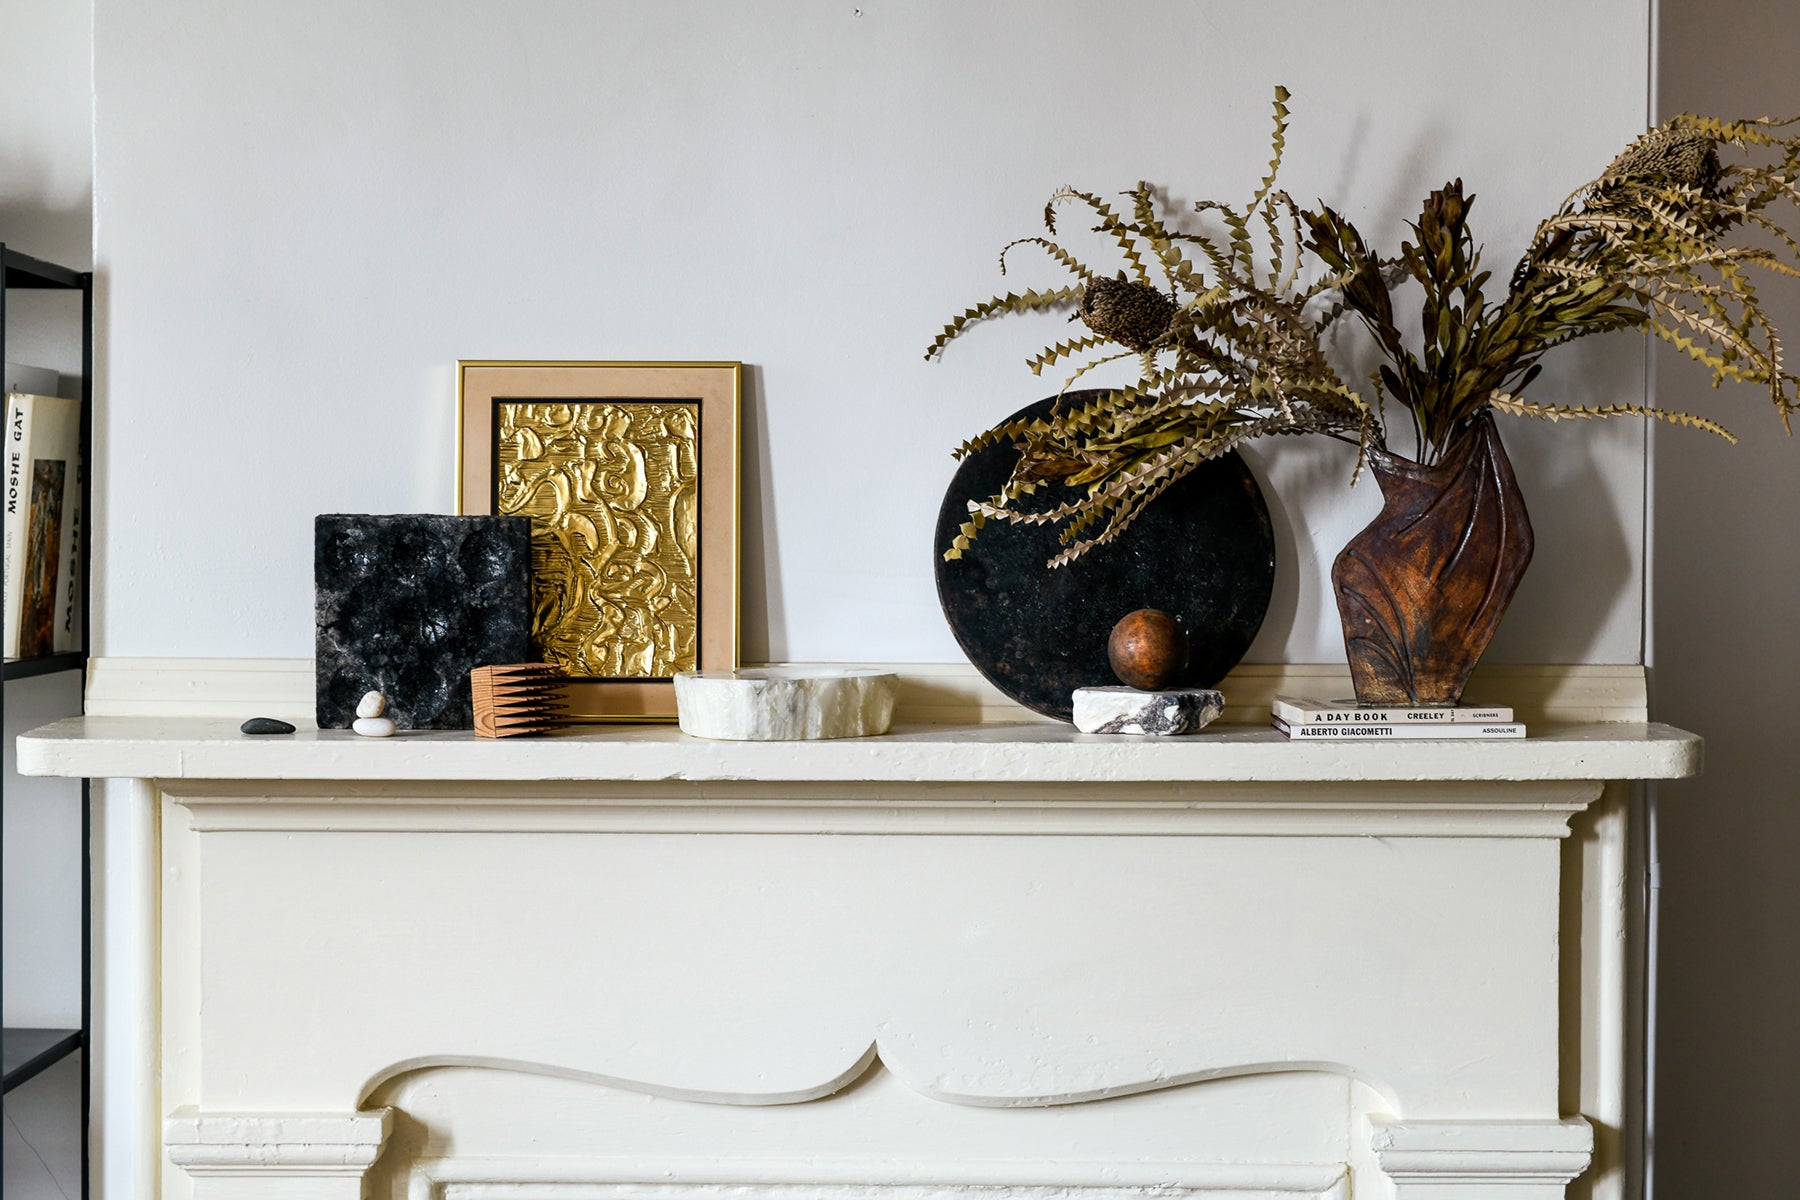 Mantel with art and a vase